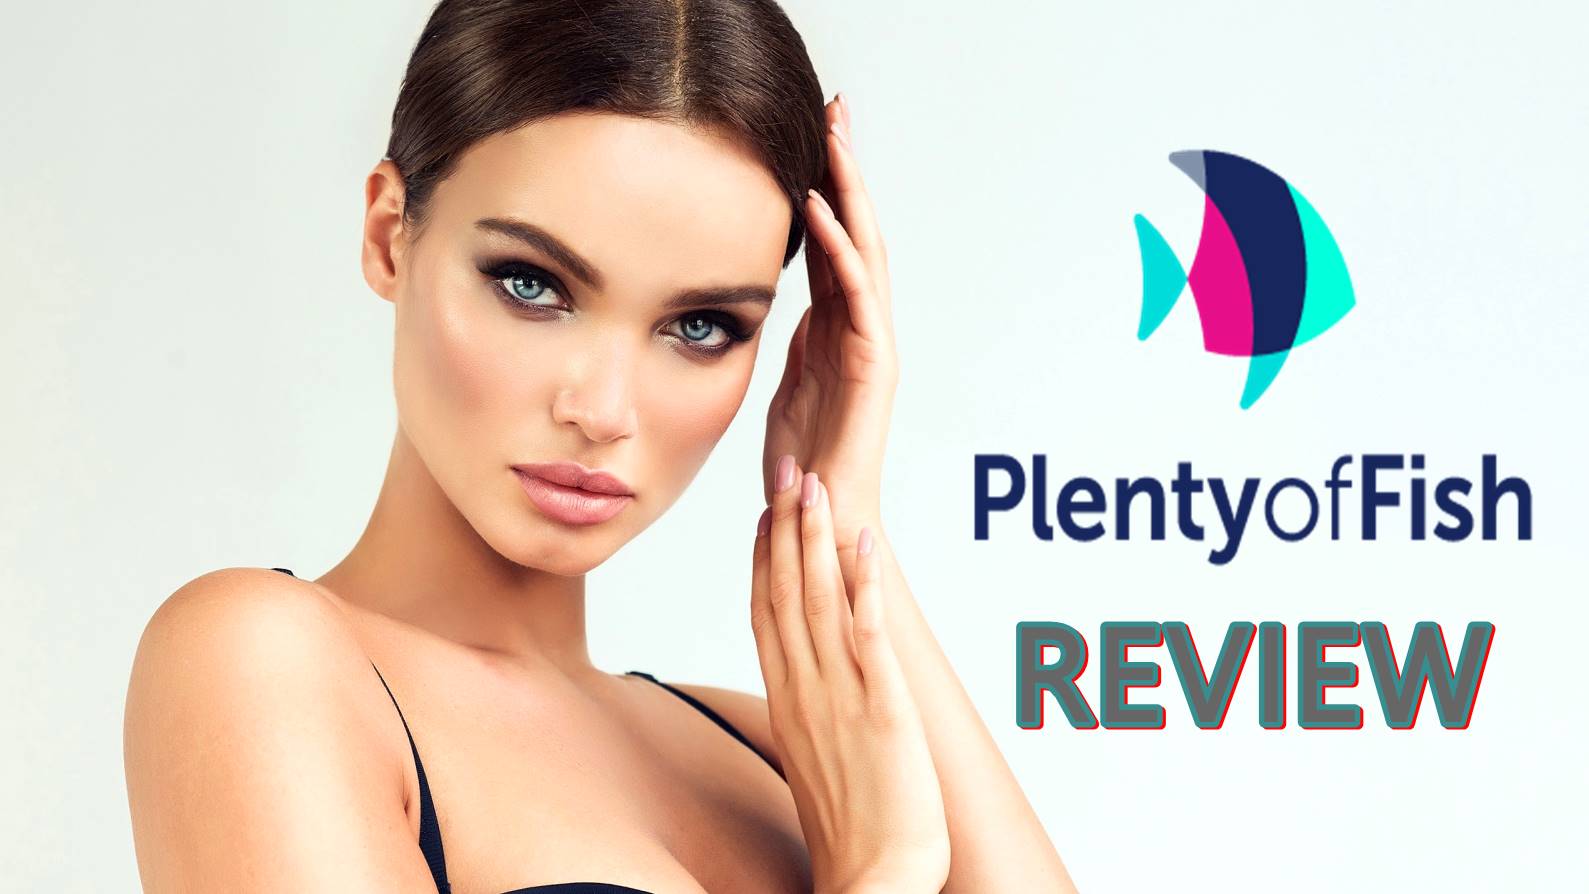 POF Review: Is Plenty of Fish Really the Best Dating Site?